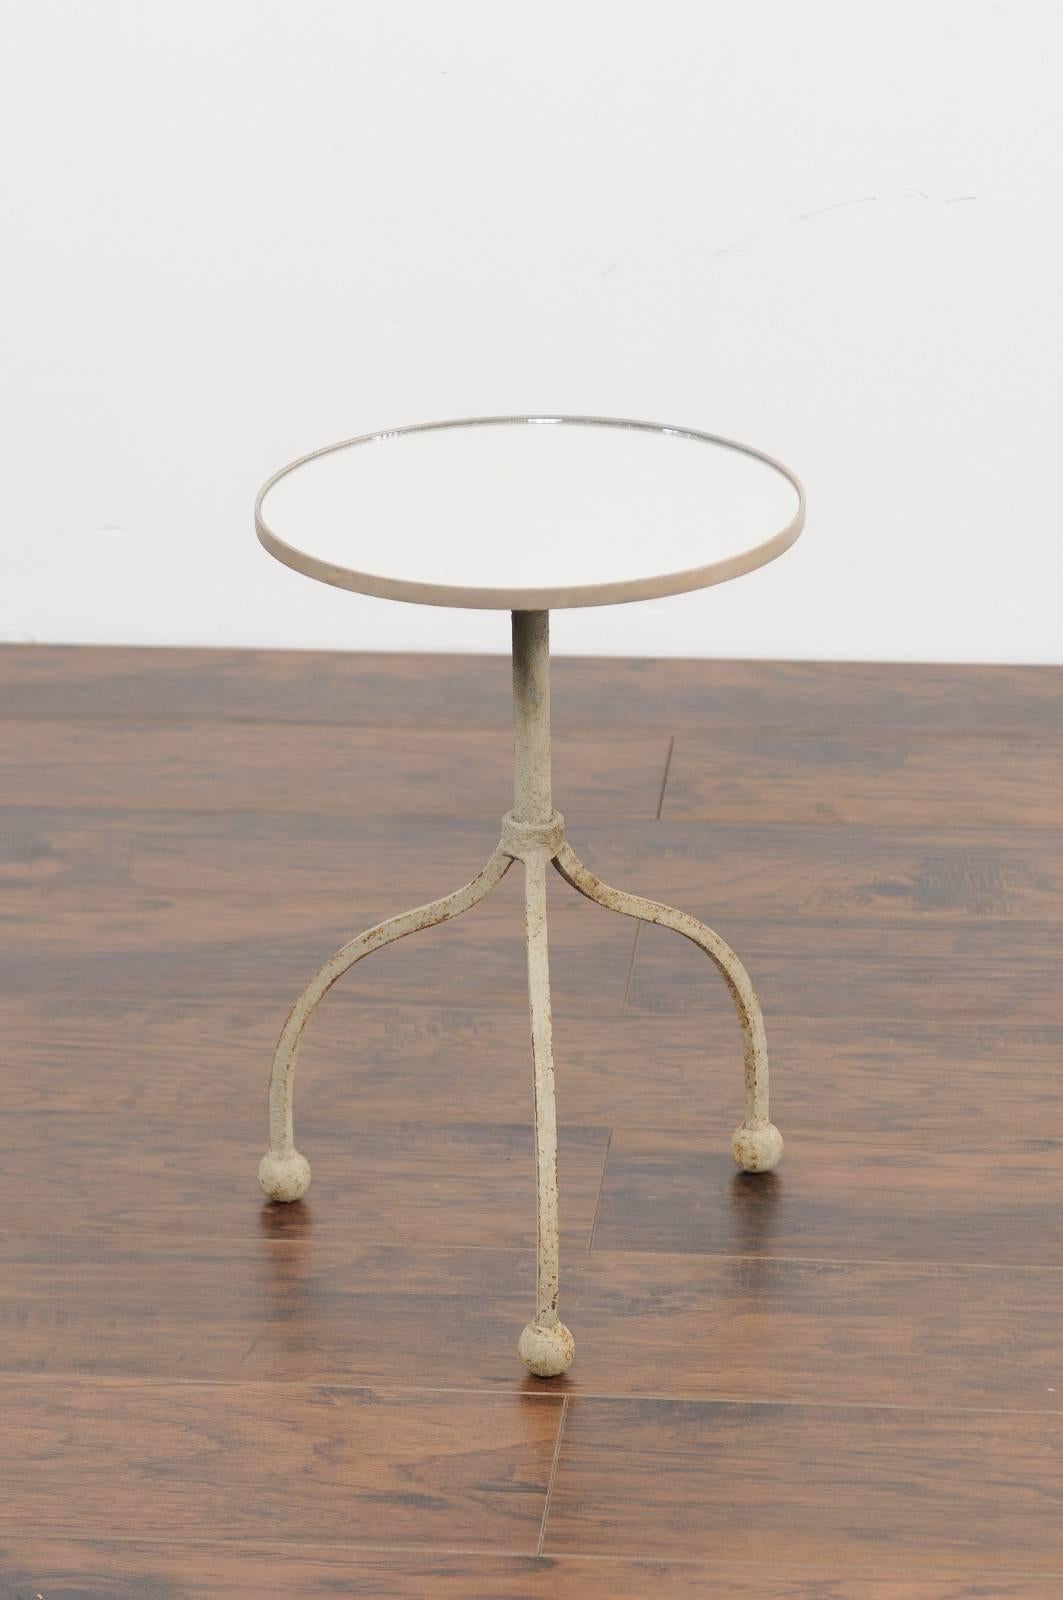 20th Century Vintage French Painted Iron Circular Side Table with Tripod Base, circa 1940